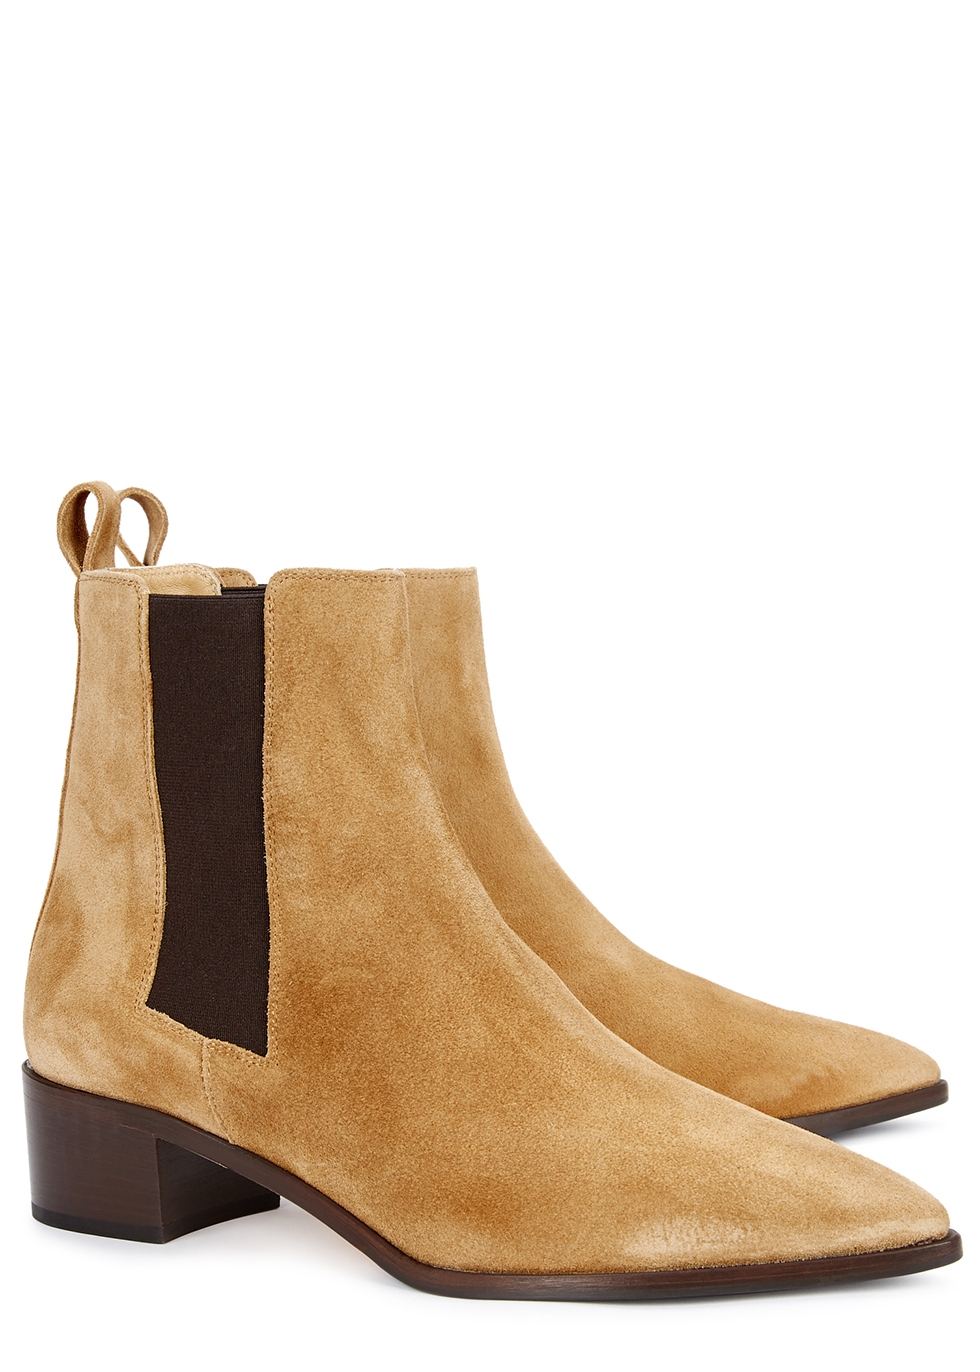 chelsea boots sand suede